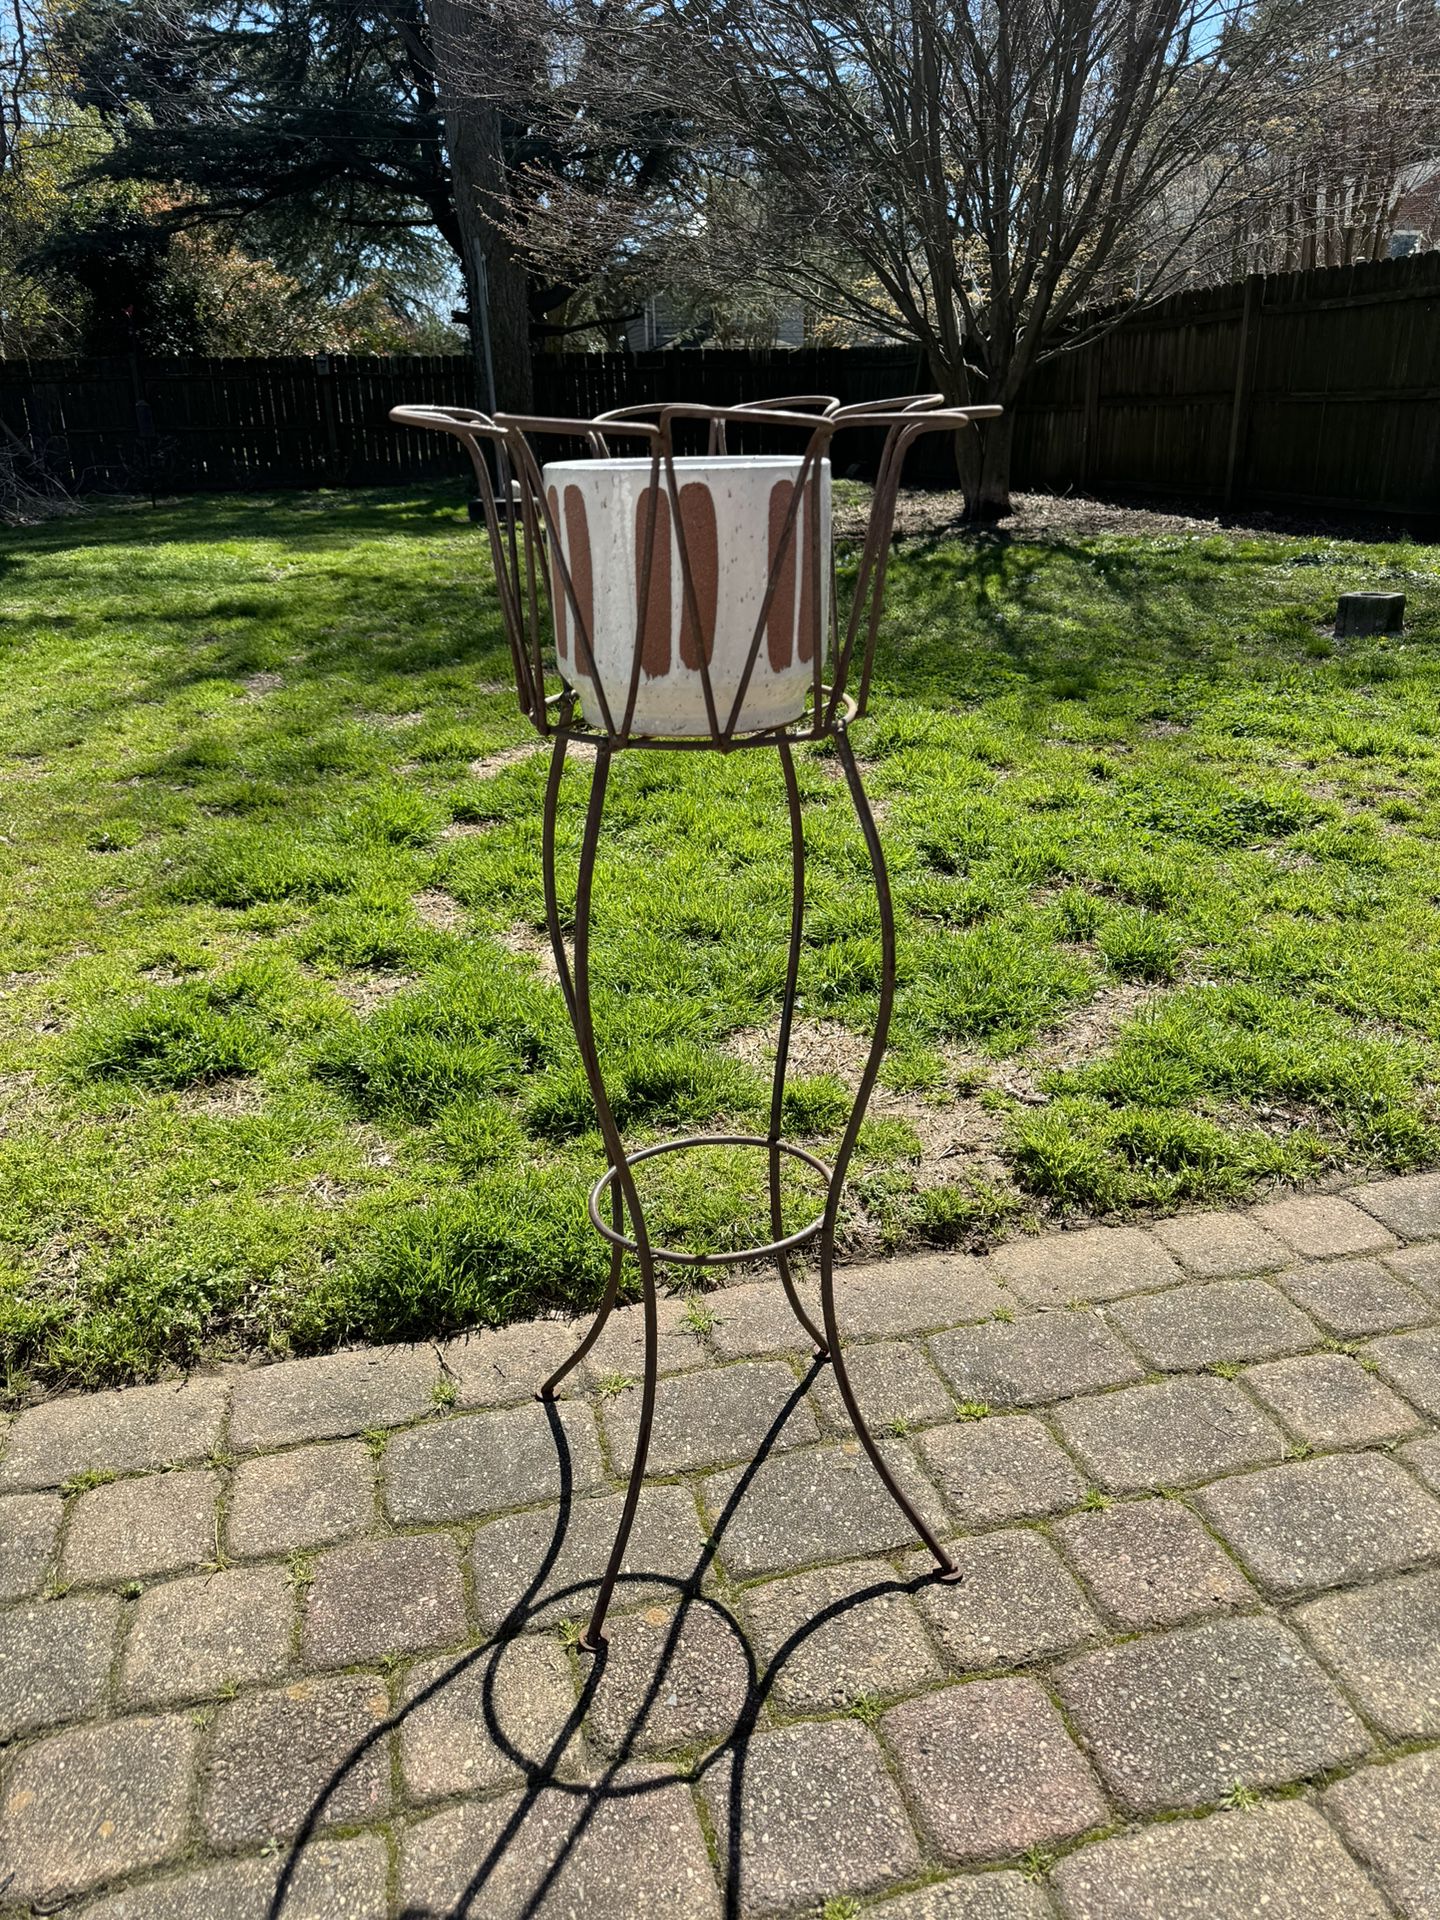 Metal Plant Stand - Flower Shaped 